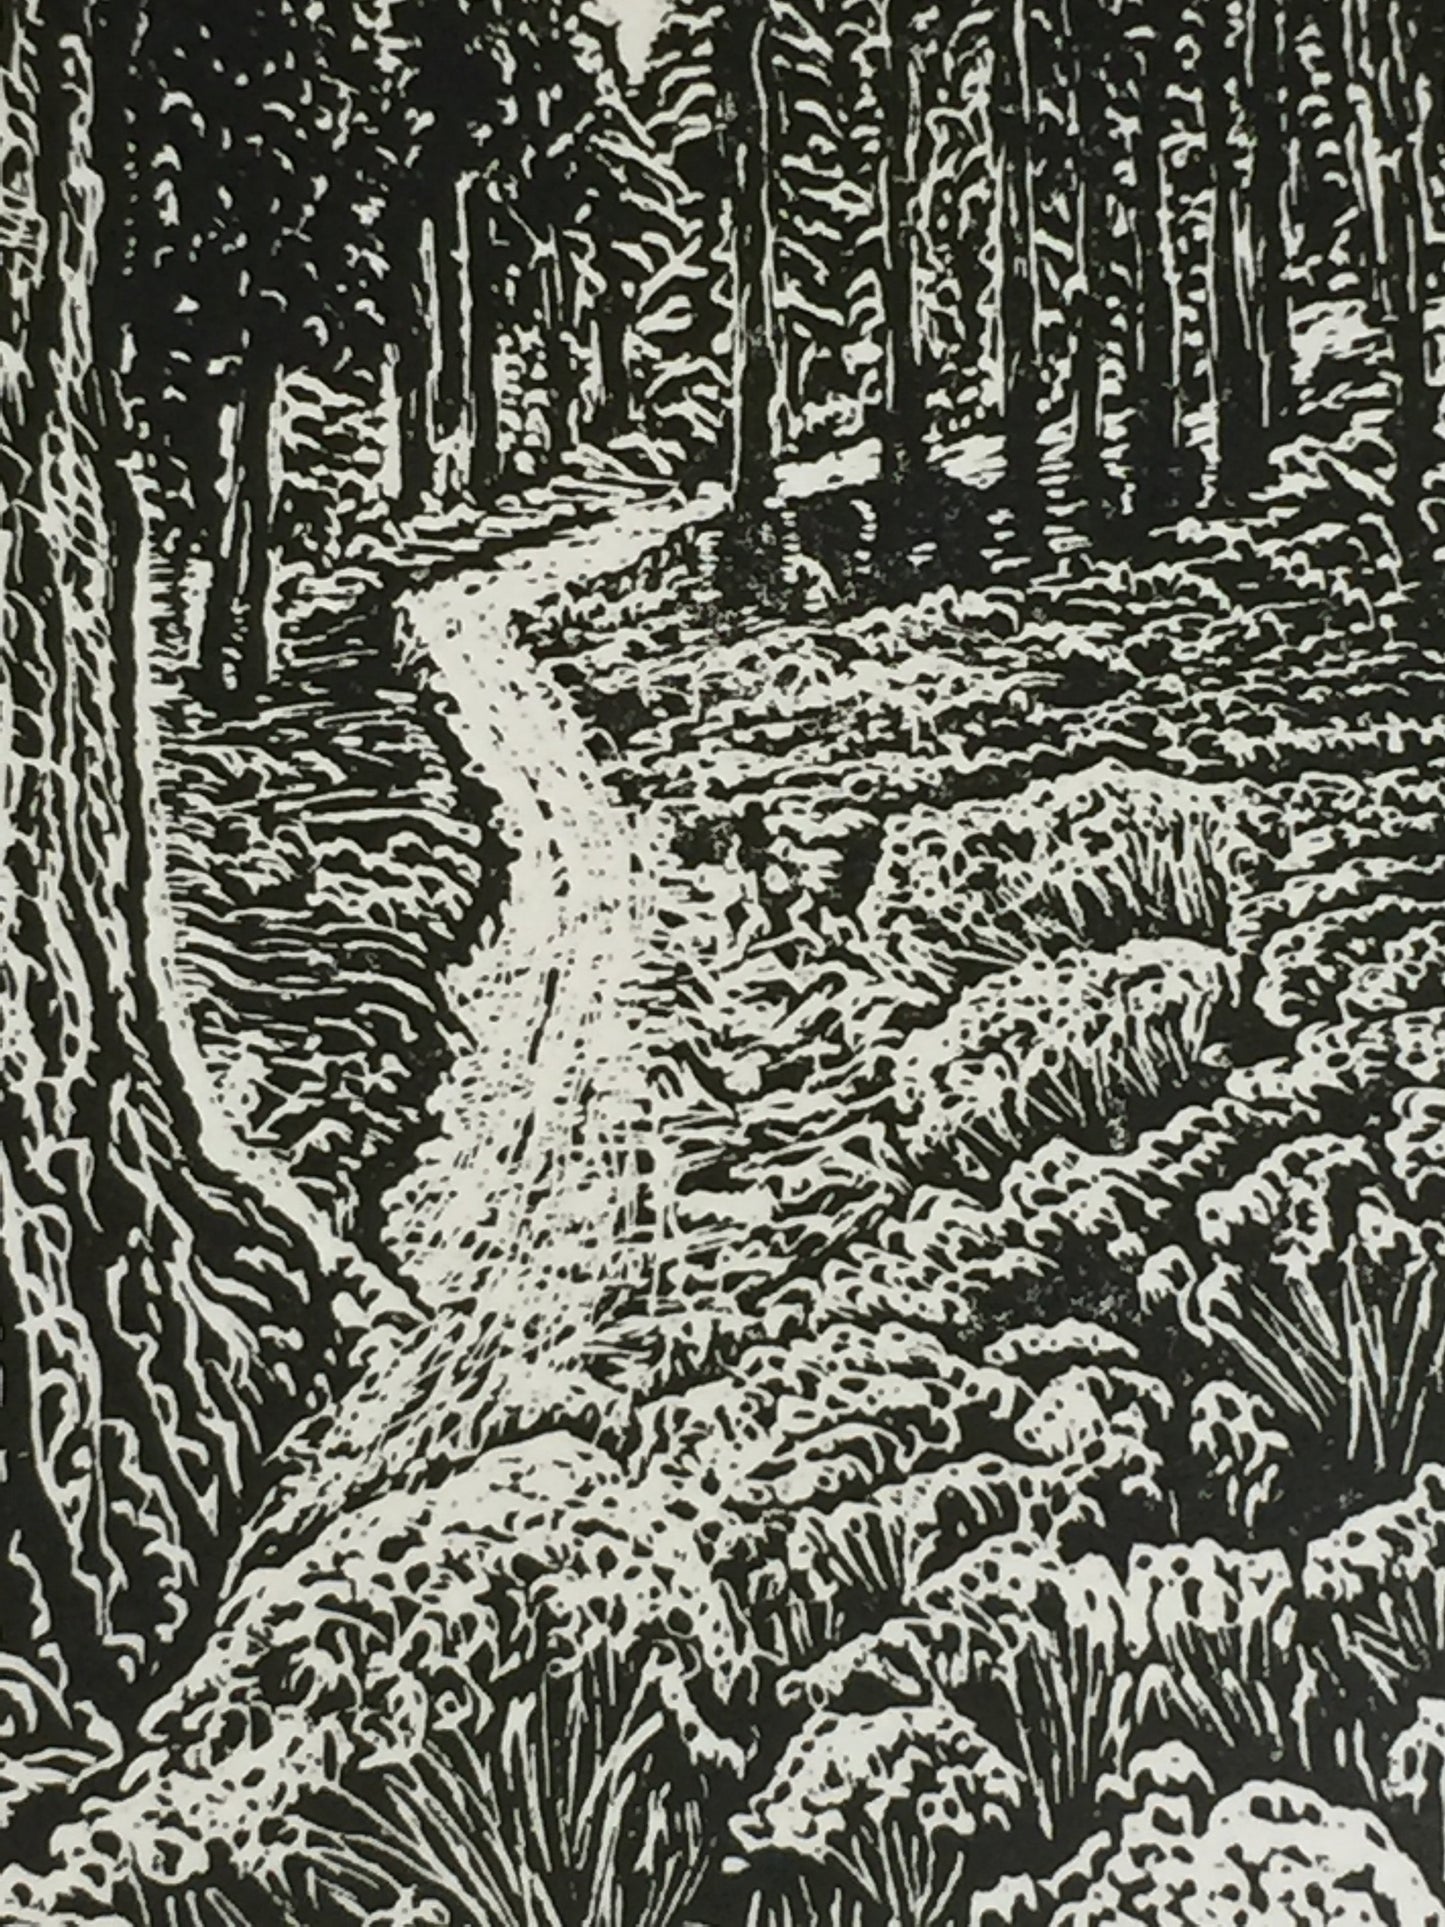 Original Wood Engraving Natures Peace Mountain Sunny Trail Among Pine Trees